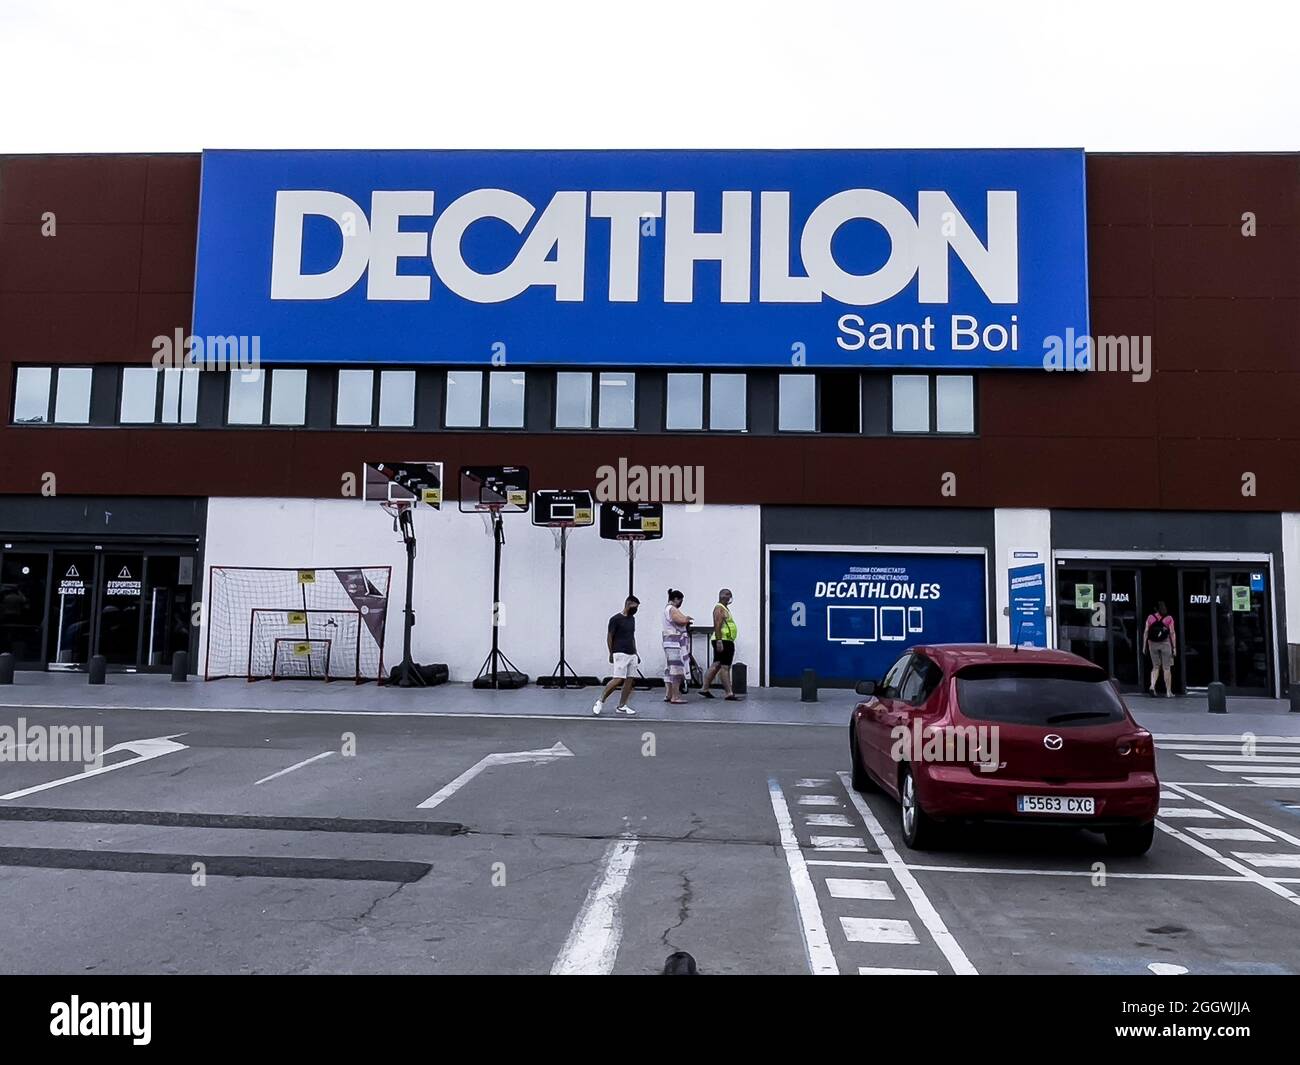 BARCELONA, SPAIN - Aug 10, 2021: Barcelona, Catalonia, Spain - August 10th 2021: Decathlon store in Barcelona. It is a French company, the largest spo Stock Photo